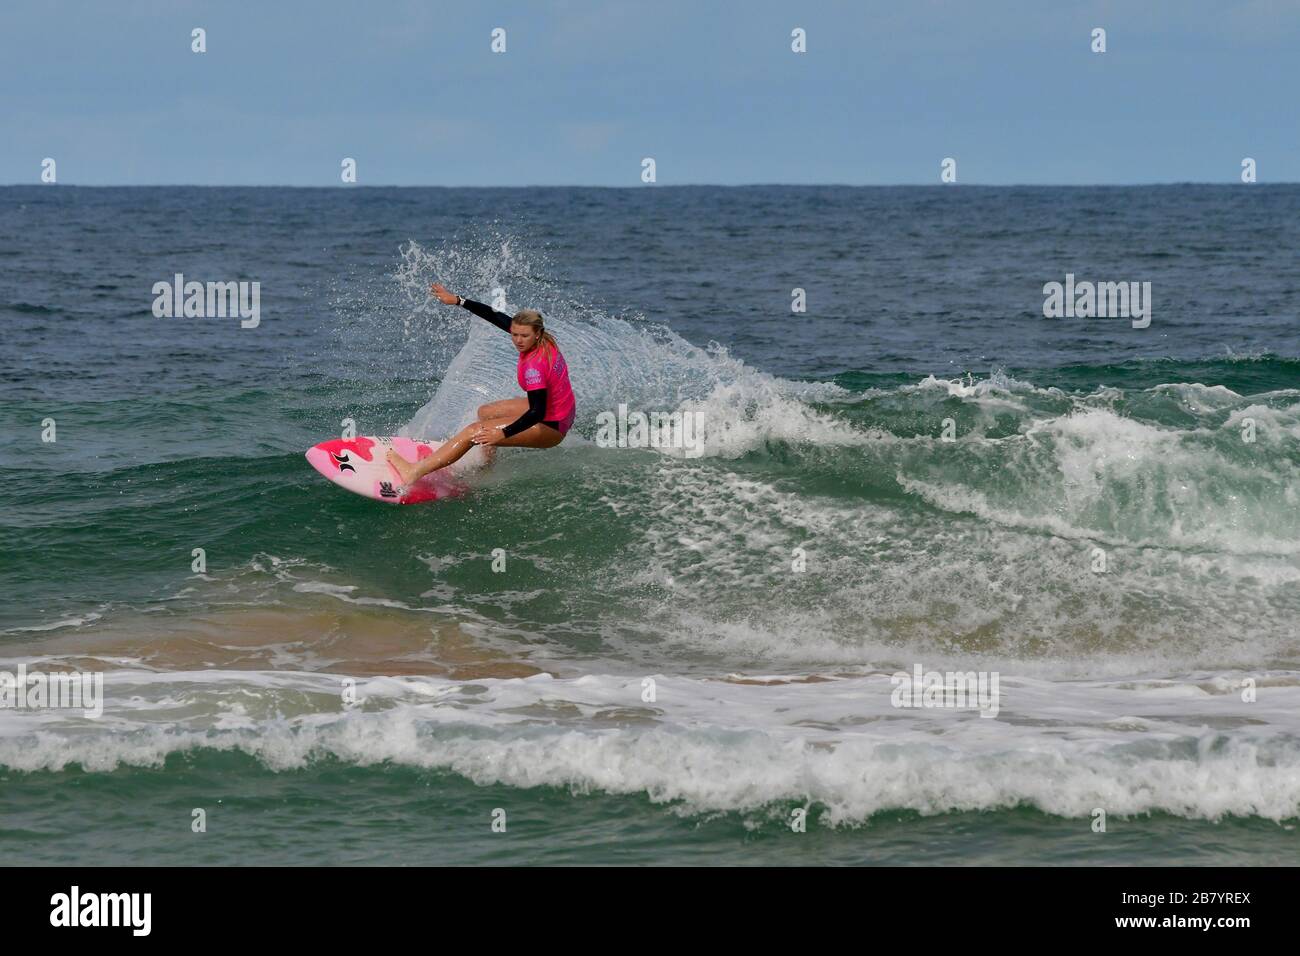 Kirra Pinkerton in action at the Sydney Surf Pro 2020 Stock Photo